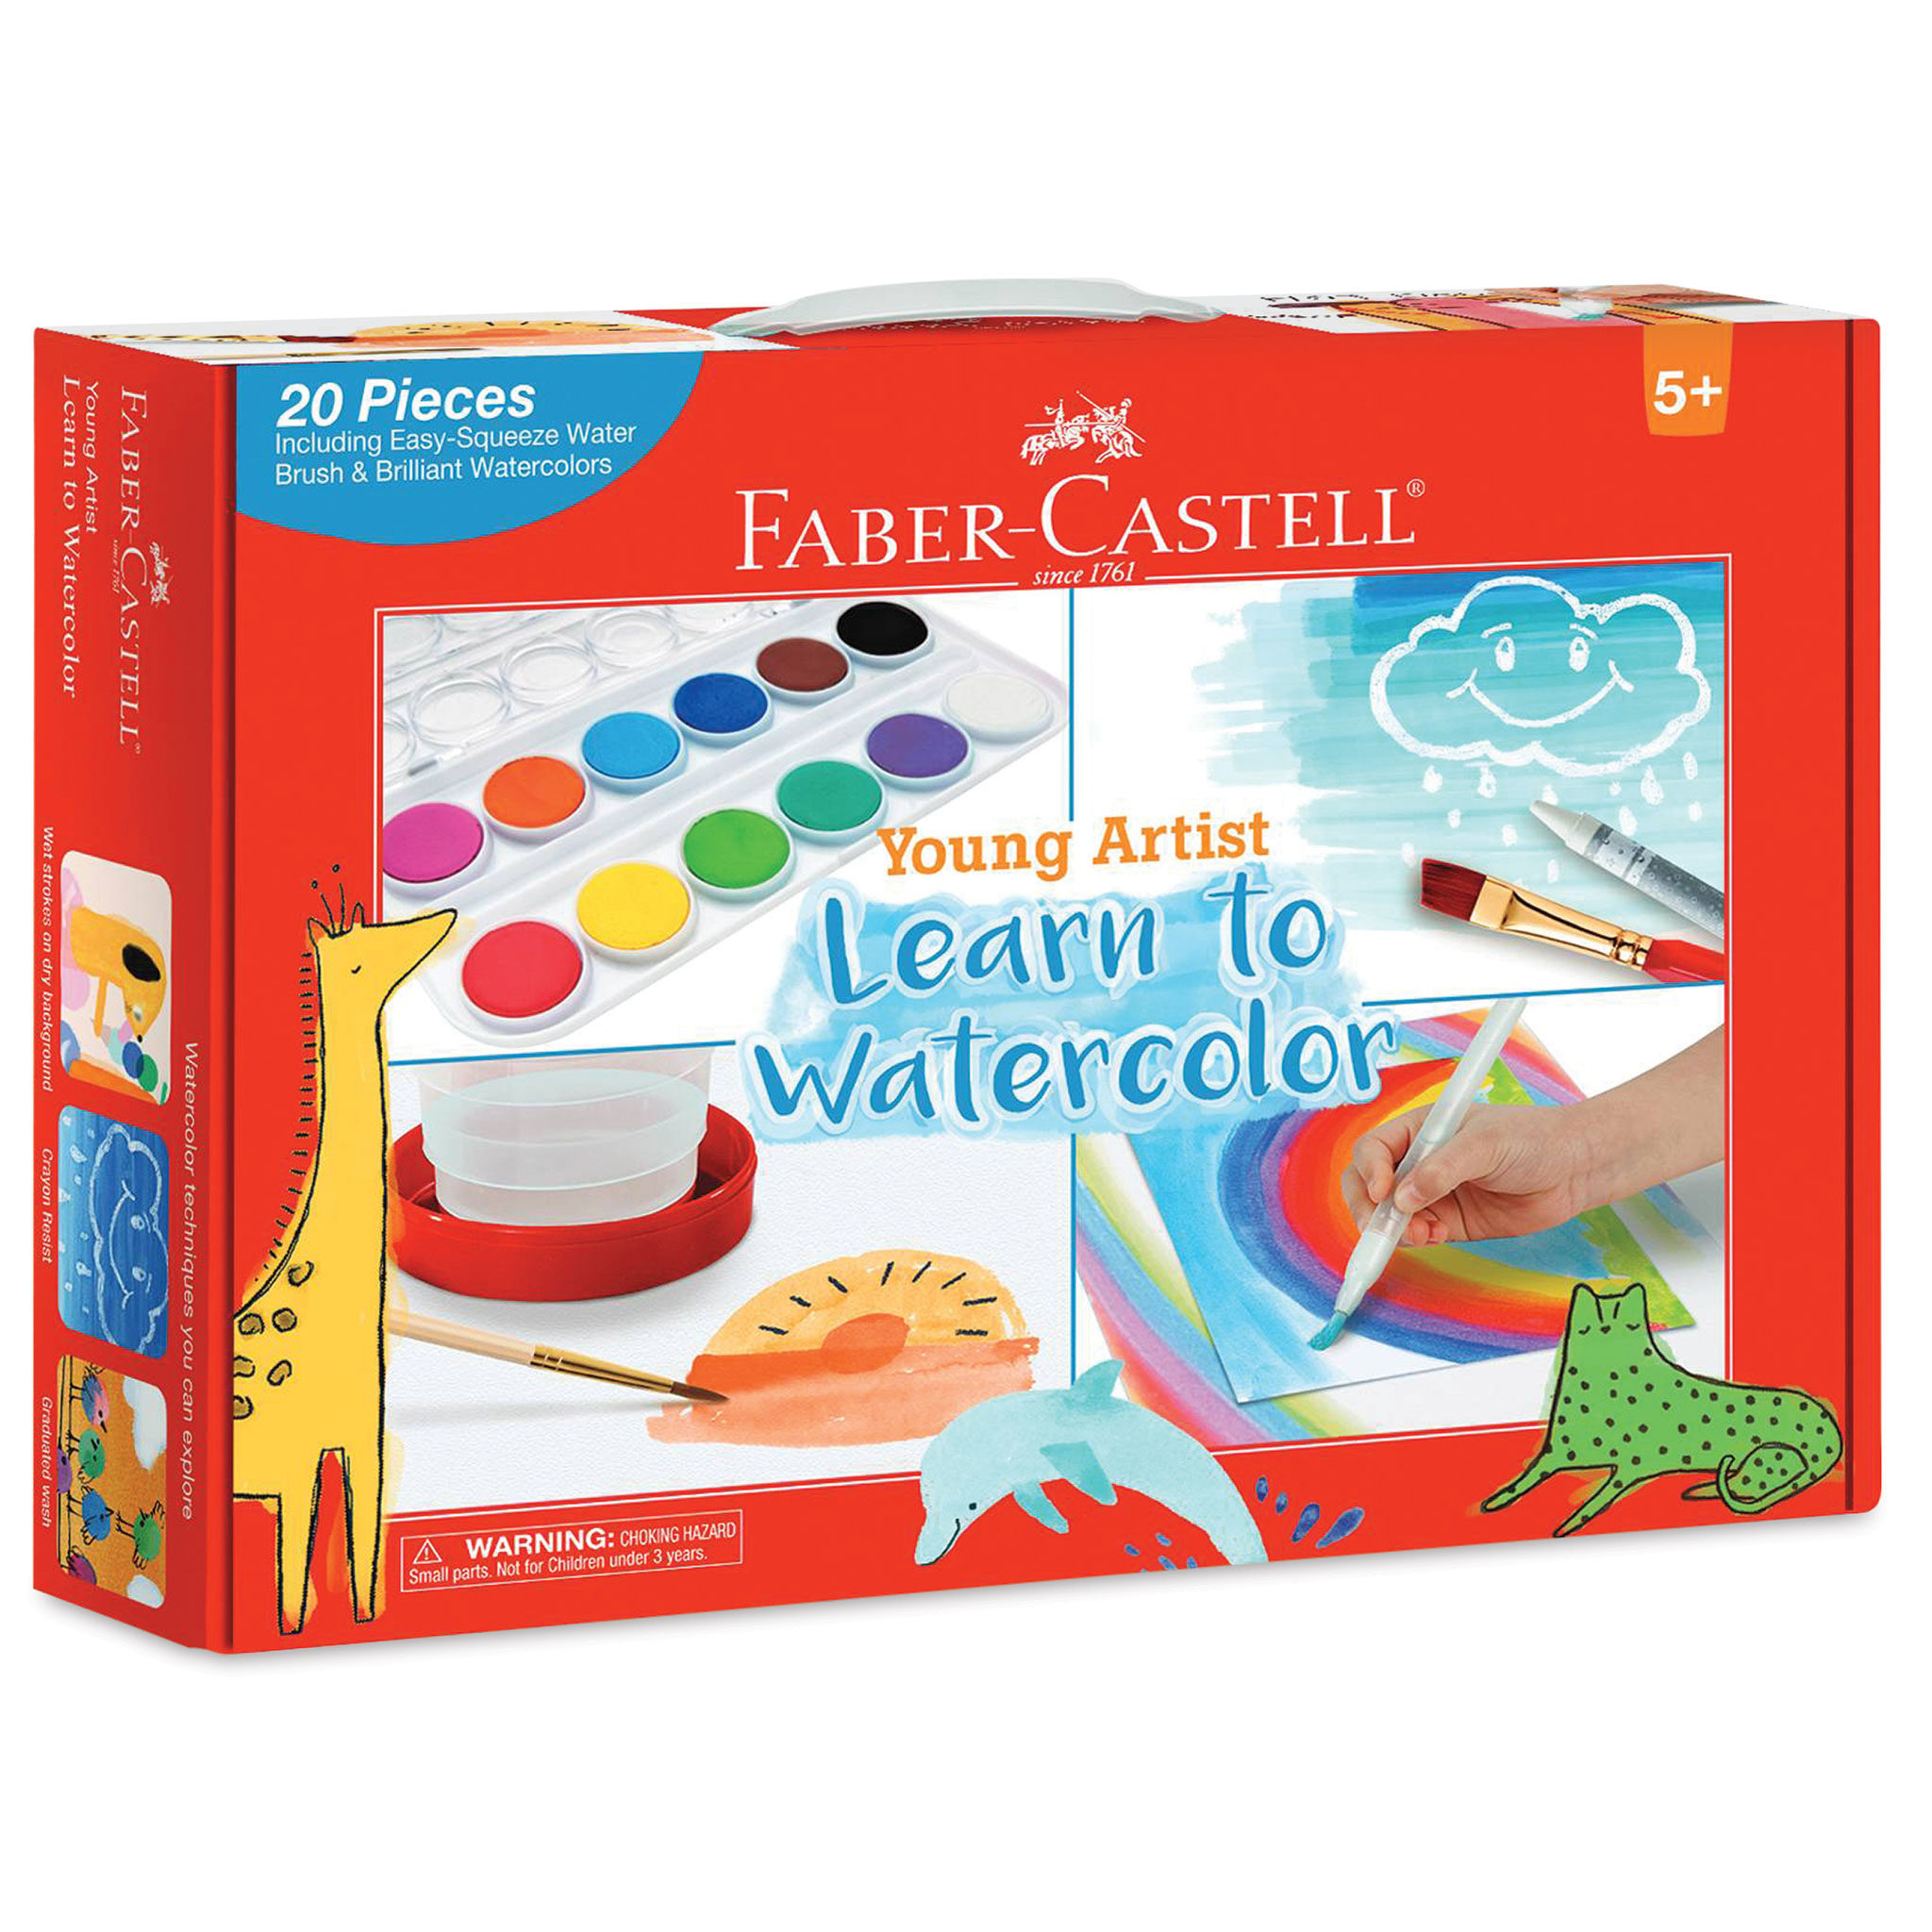 Creative Studio Watercolor Set by Faber-Castell Review - Doodlewash®